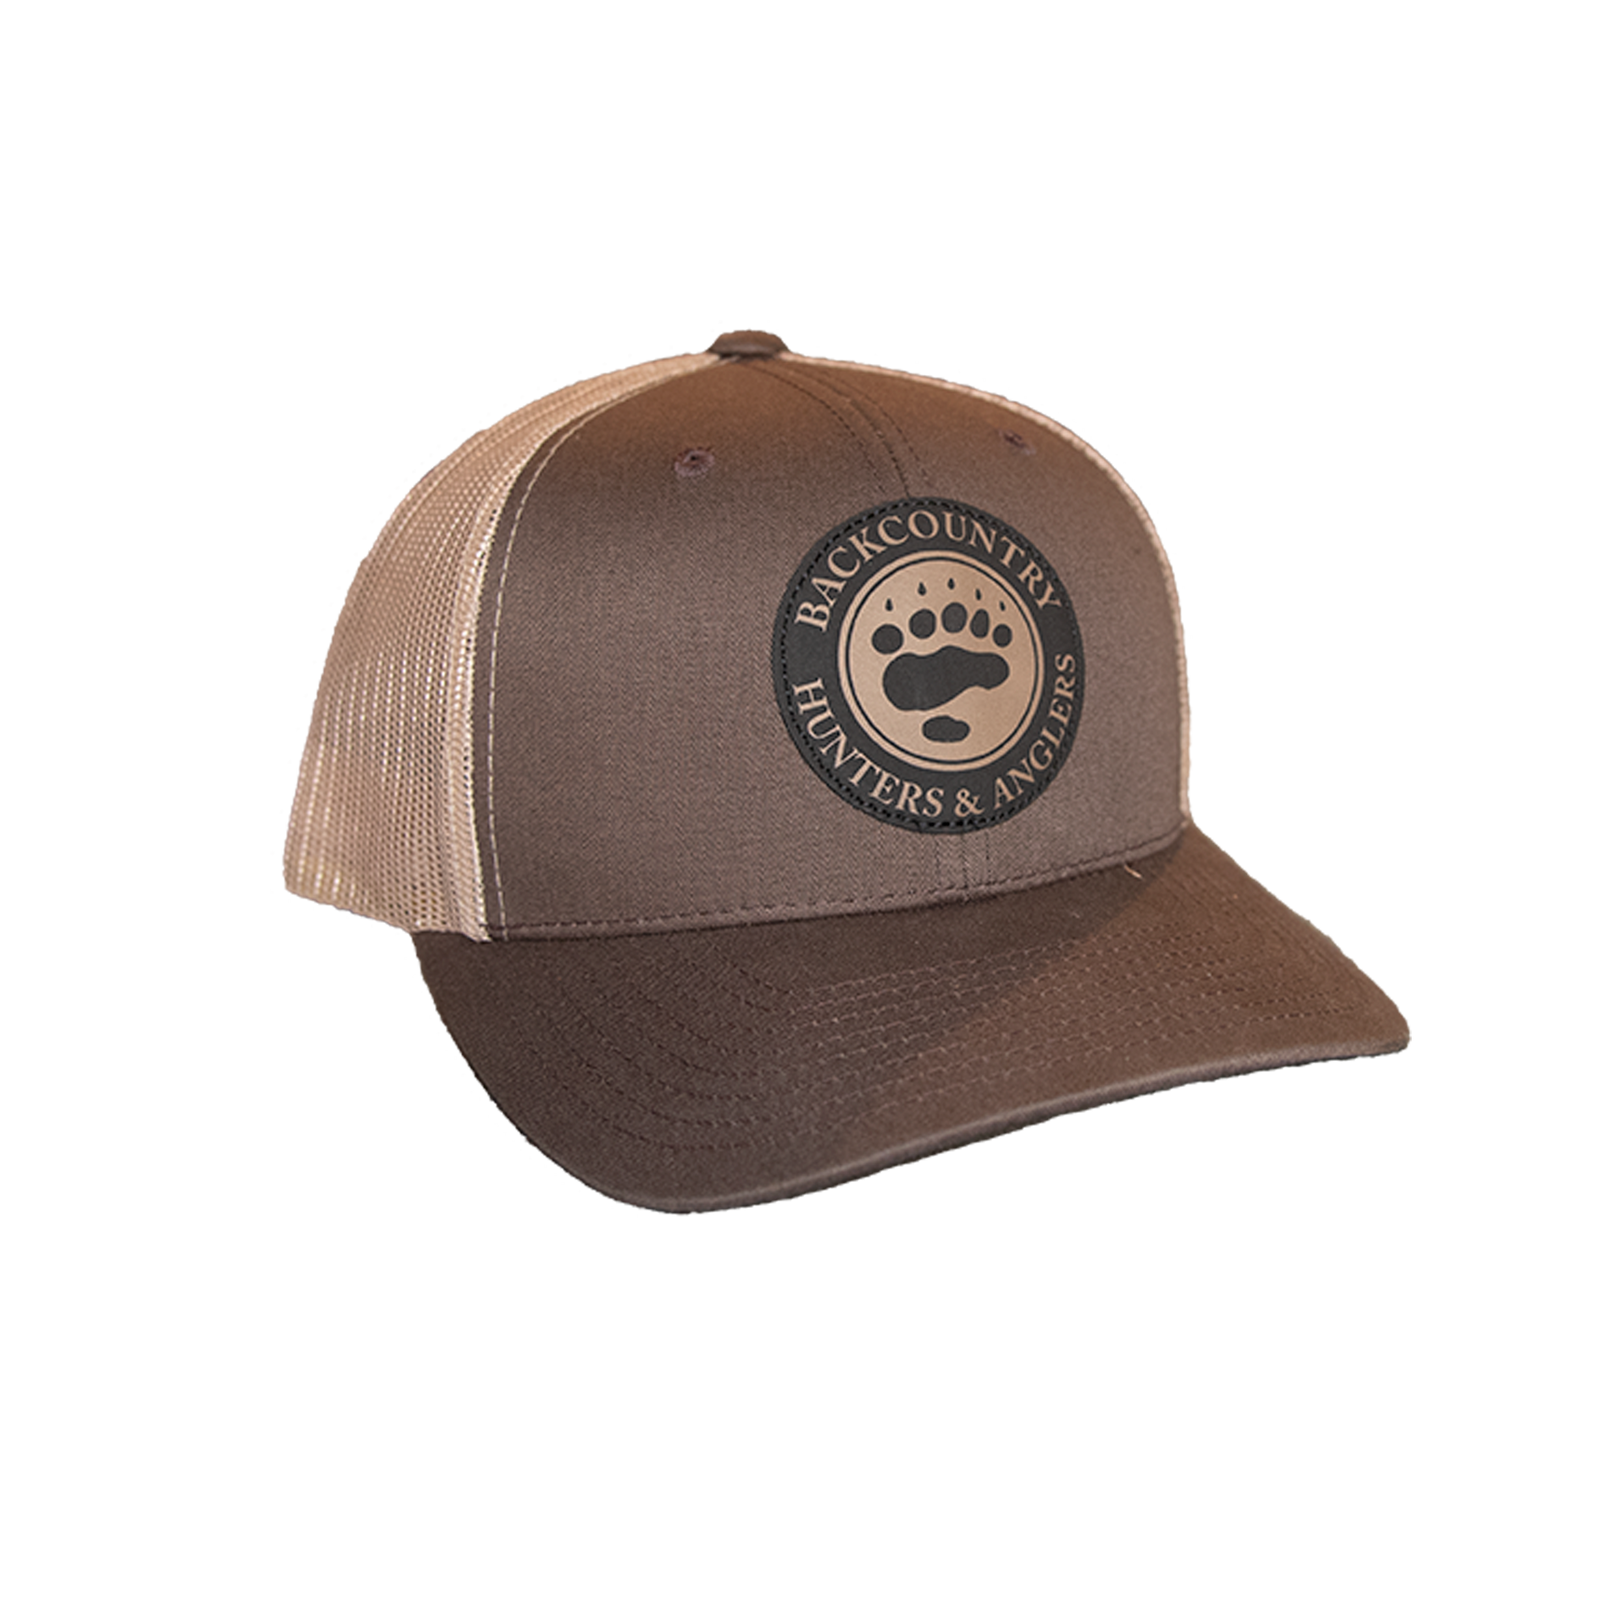 BHA Trucker Hat - Multicam - Backcountry Hunters & Anglers Store